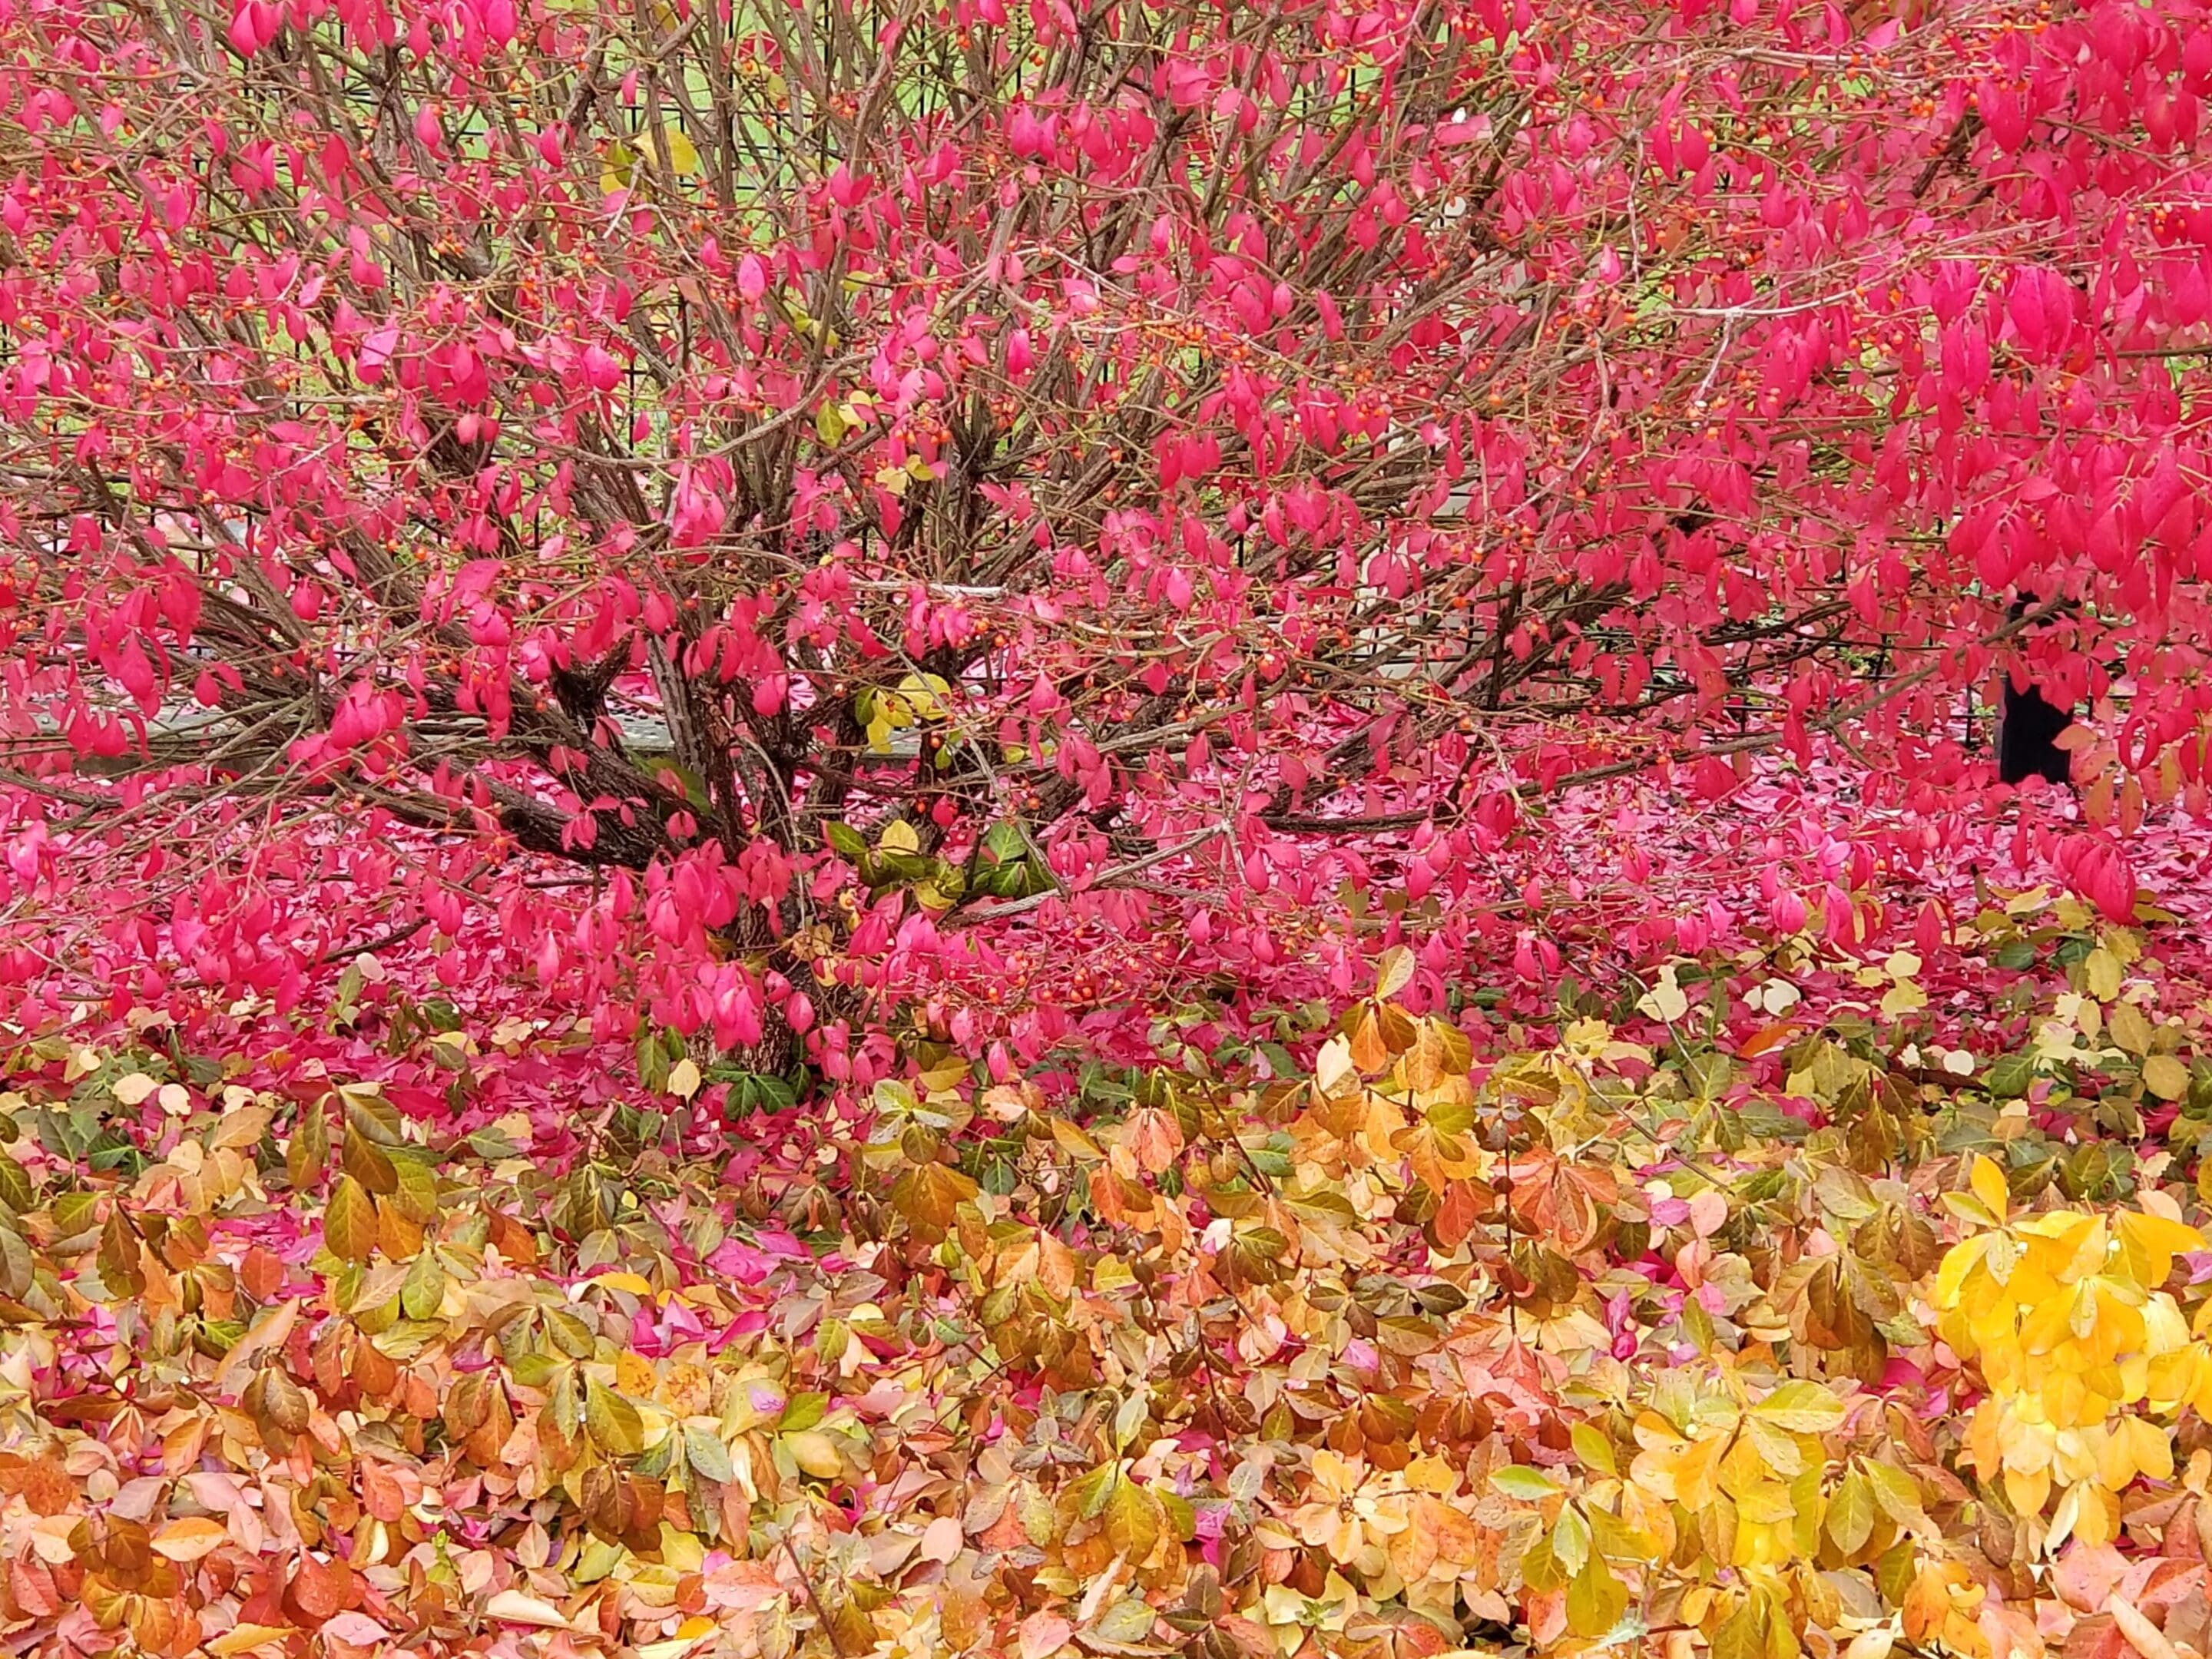 A bush with pink flowers and leaves in the foreground.